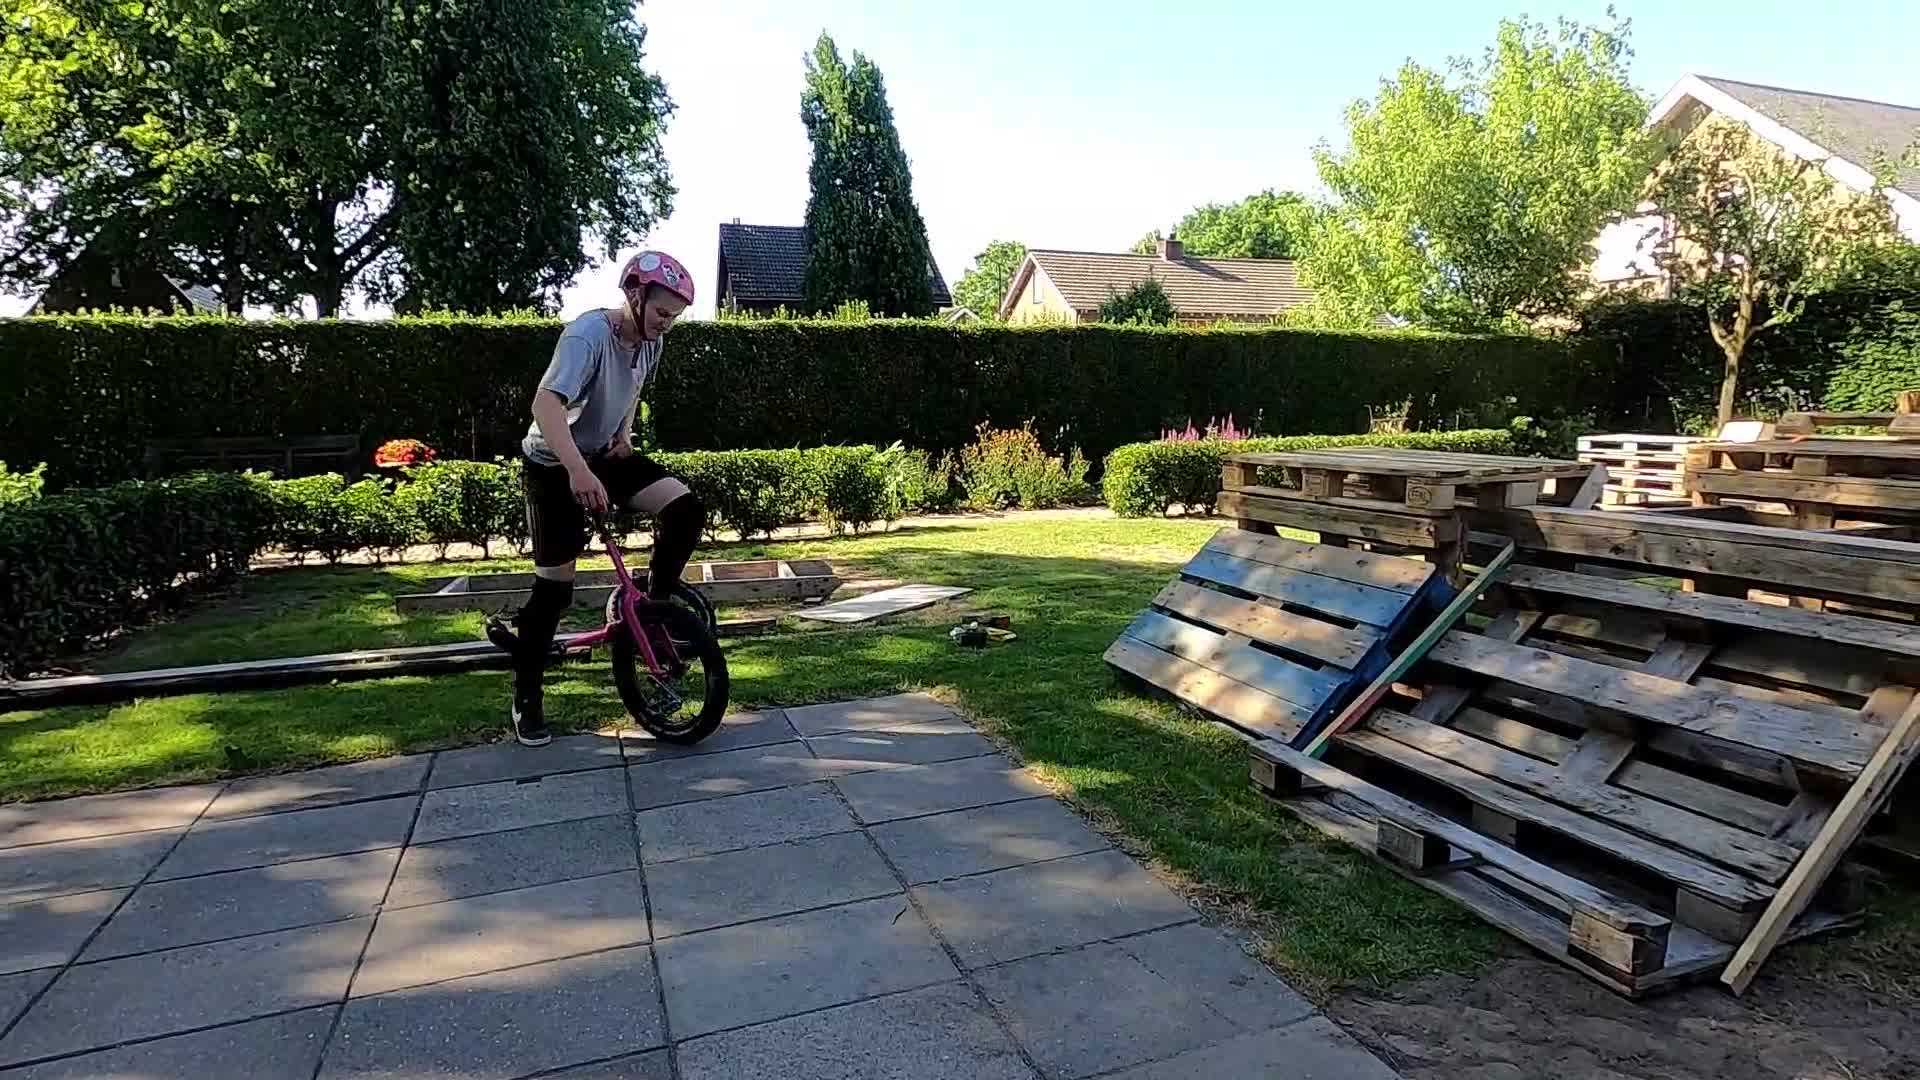 Person Falls Hard While Training on Unicycle